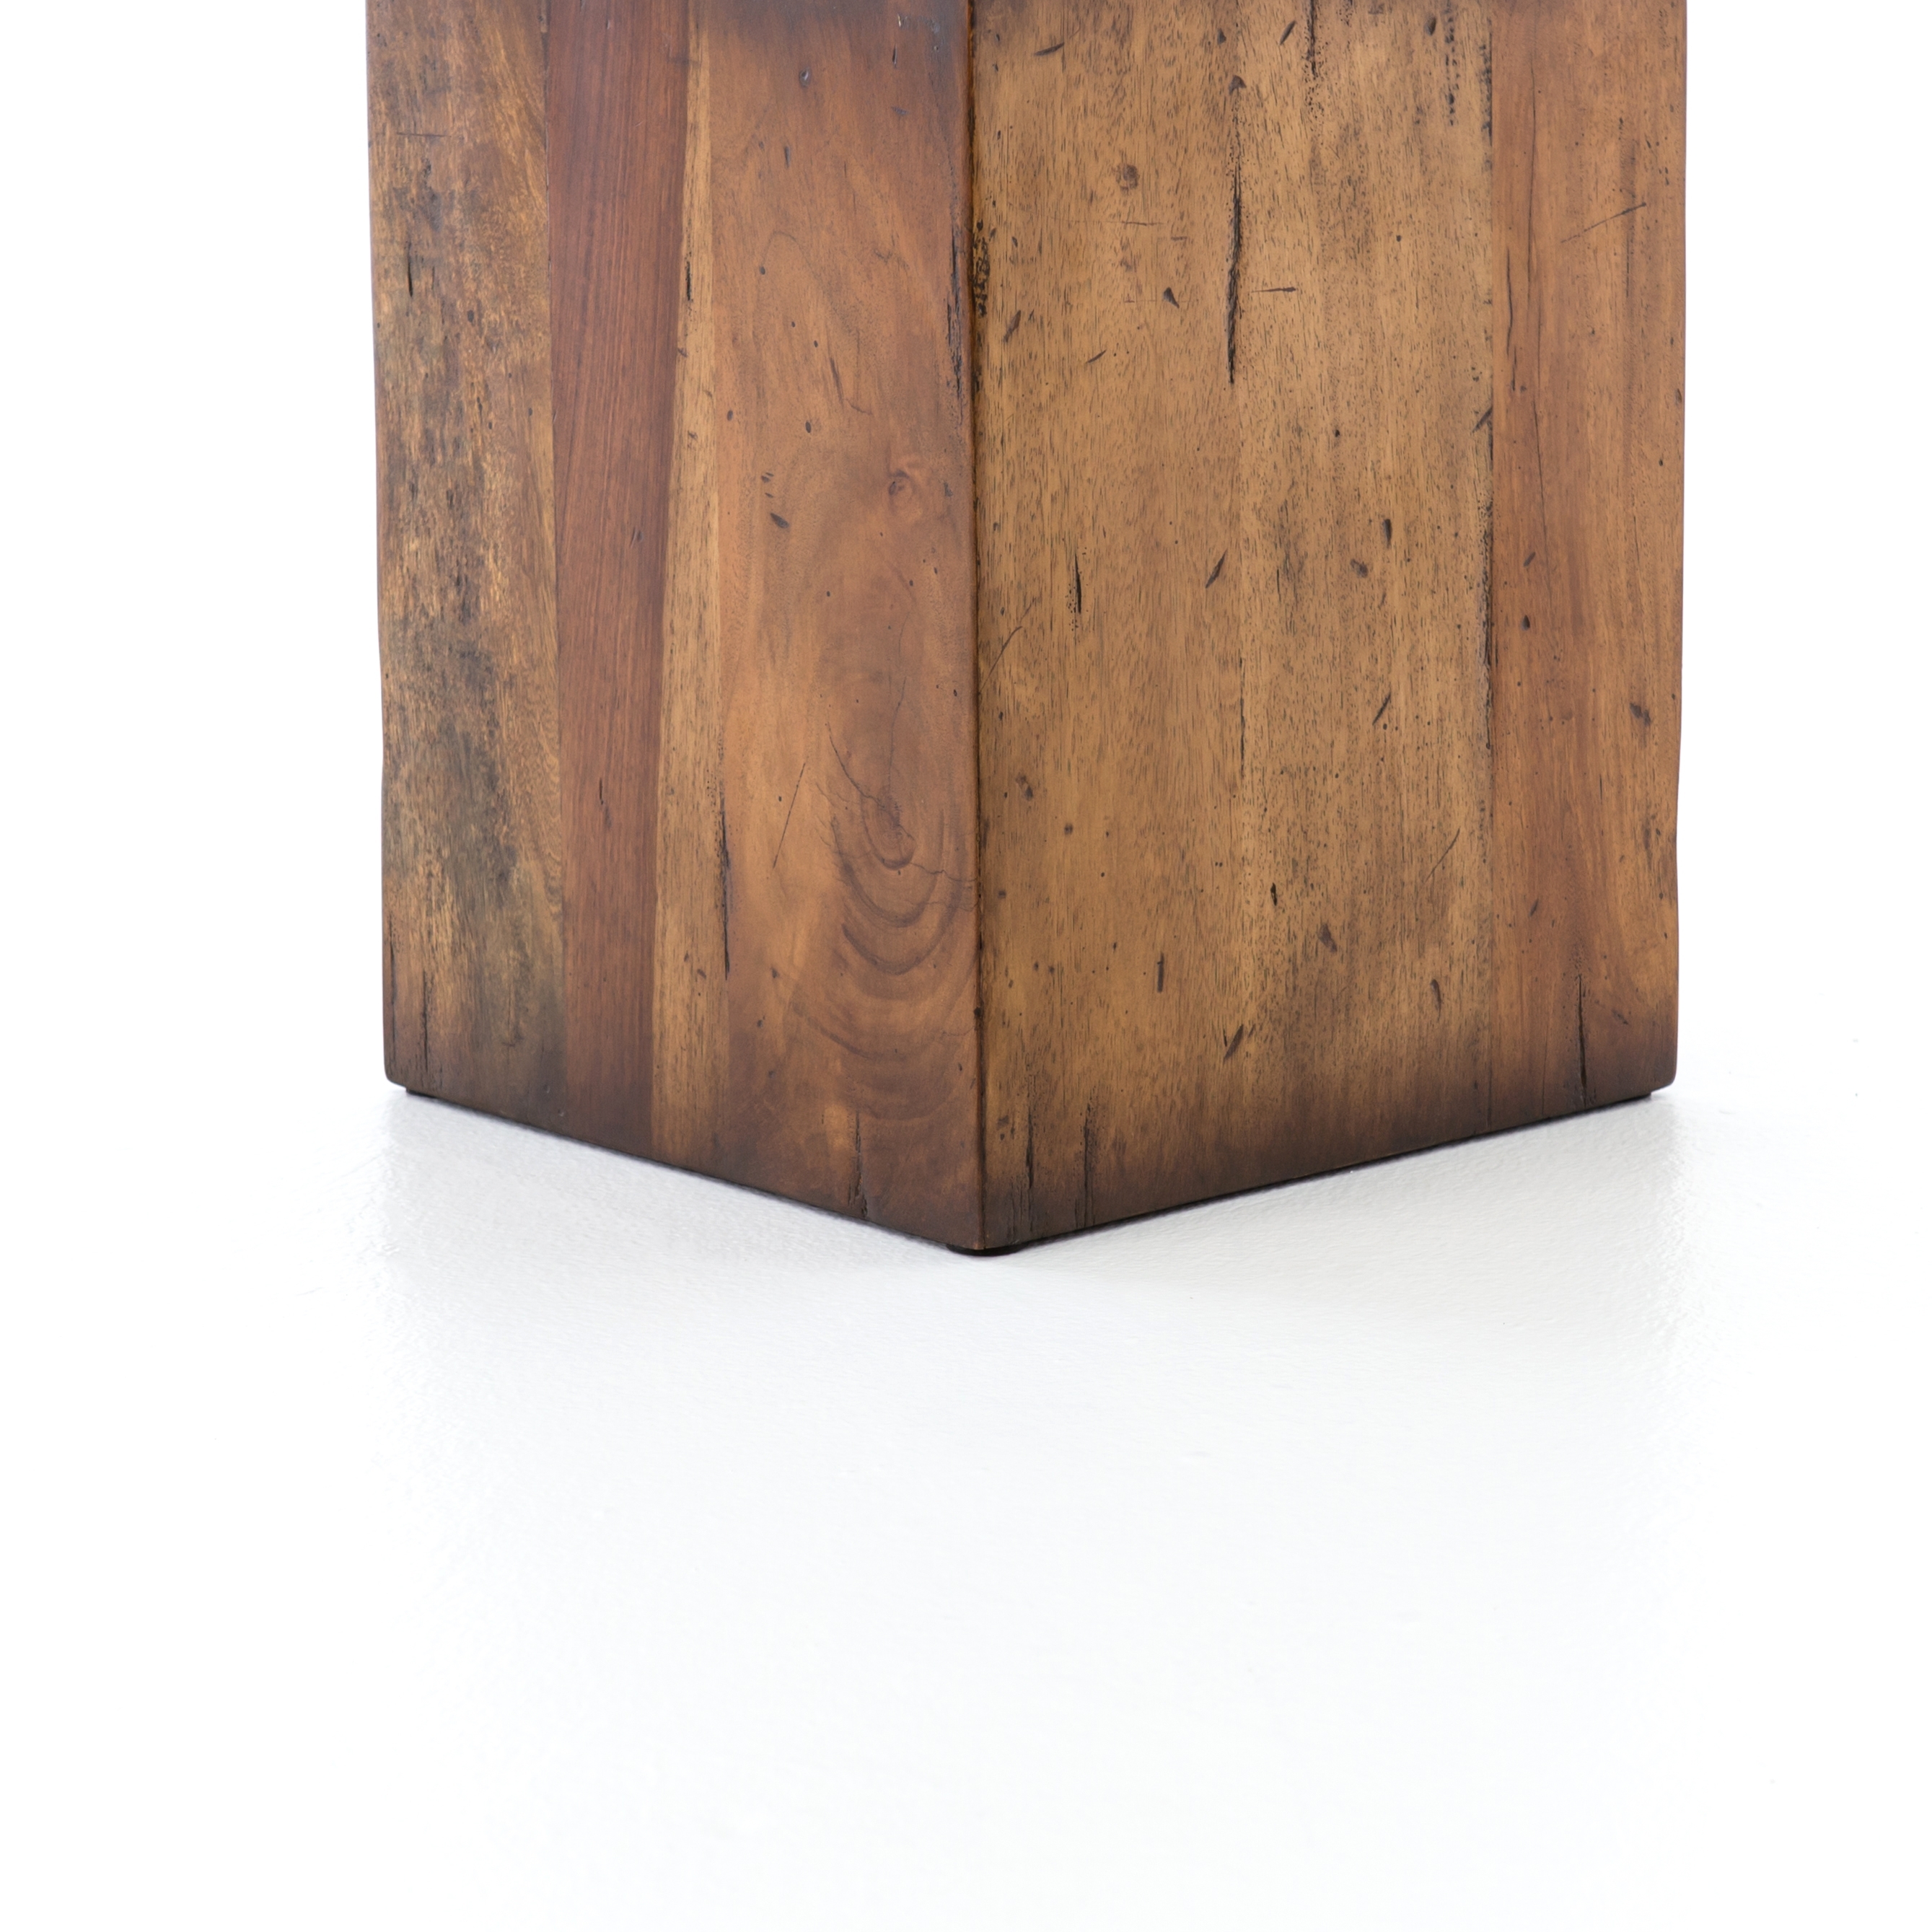 Duncan End Table-Reclaimed Fruitwood - Image 3